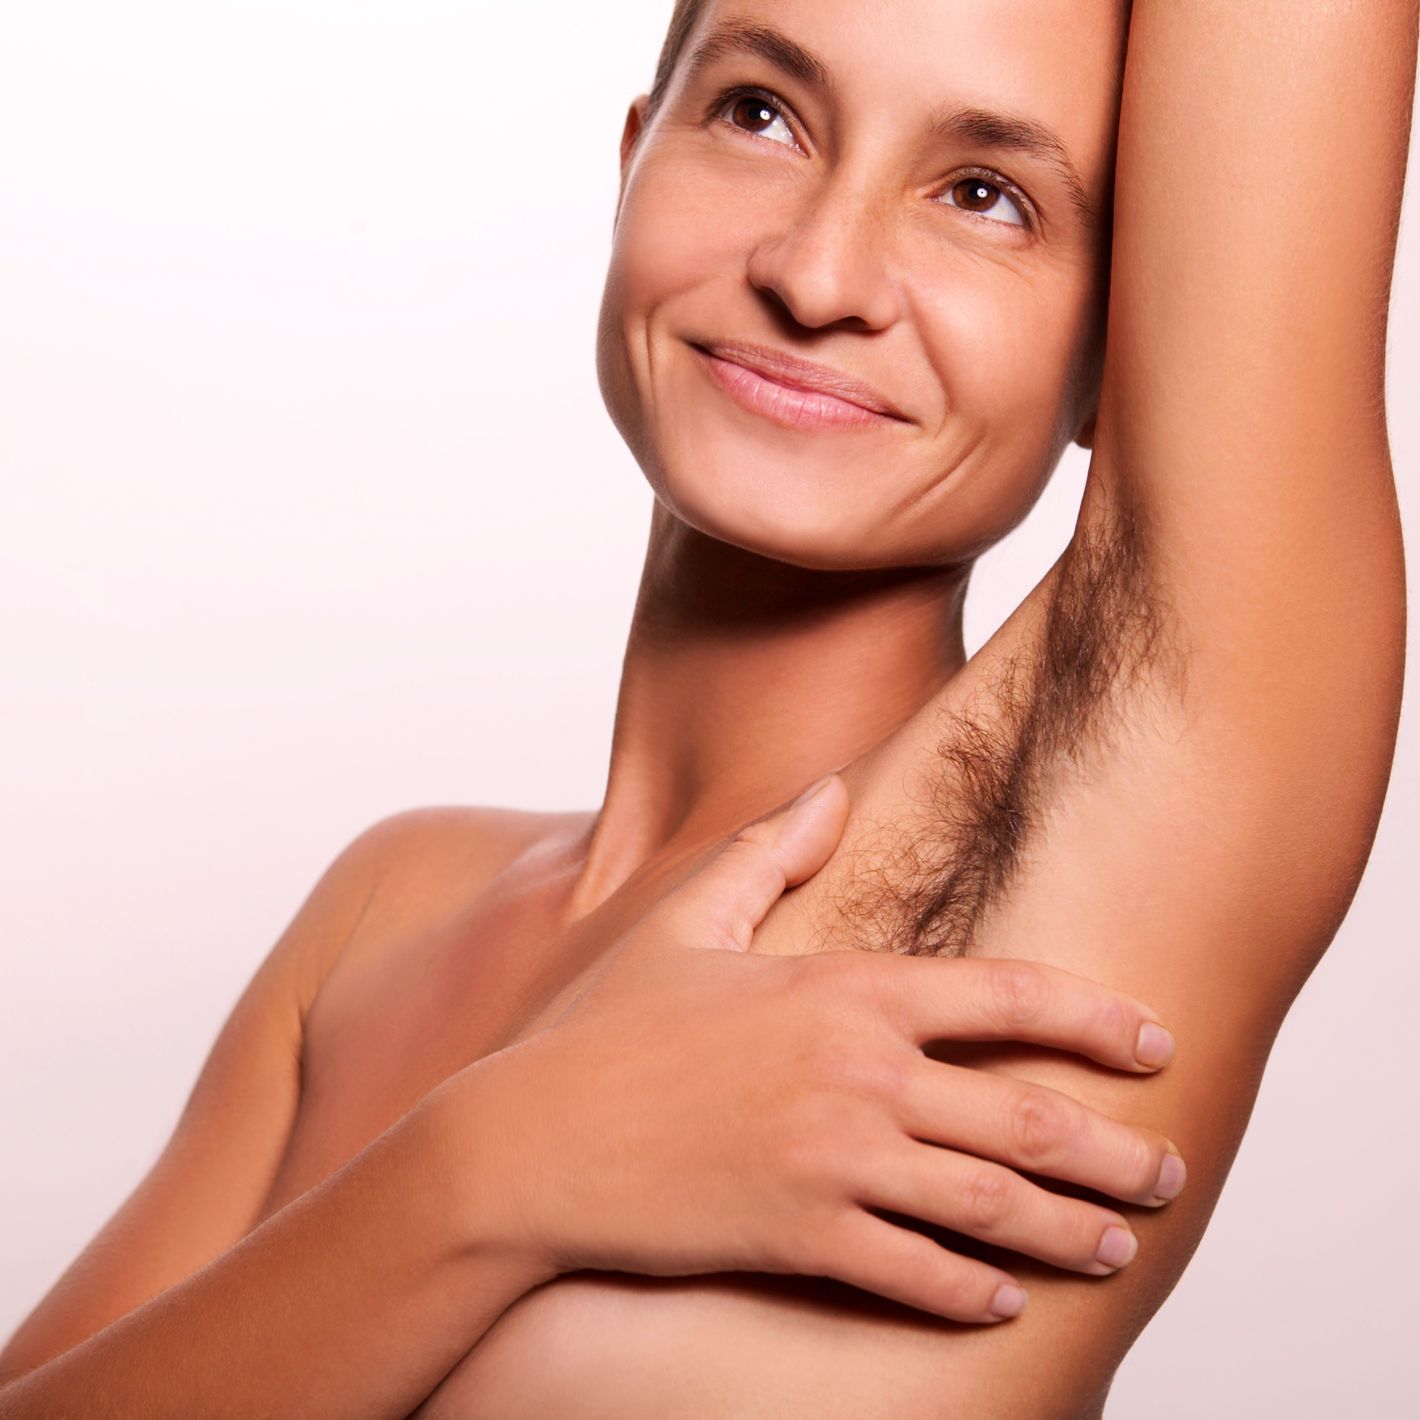 Why Men Should Shave Their Armpits - Tips for Shaving Underarms